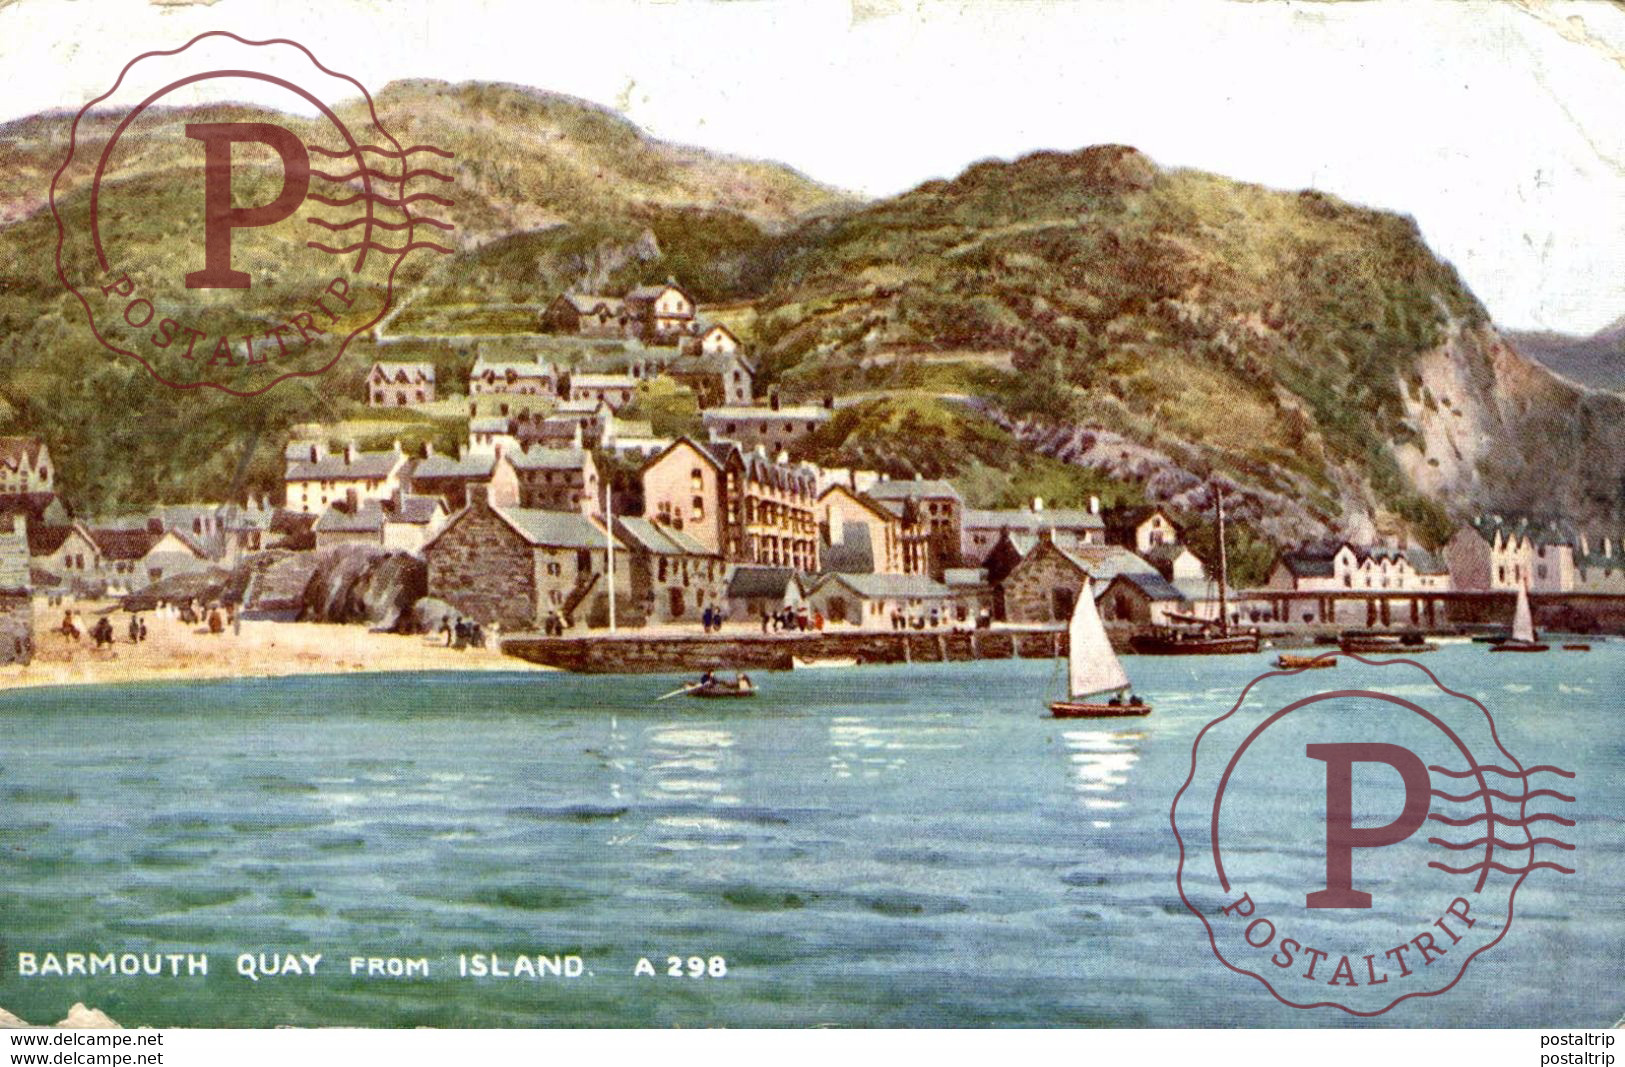 BARMOUTH QUAY FRON ISLAND - Merionethshire